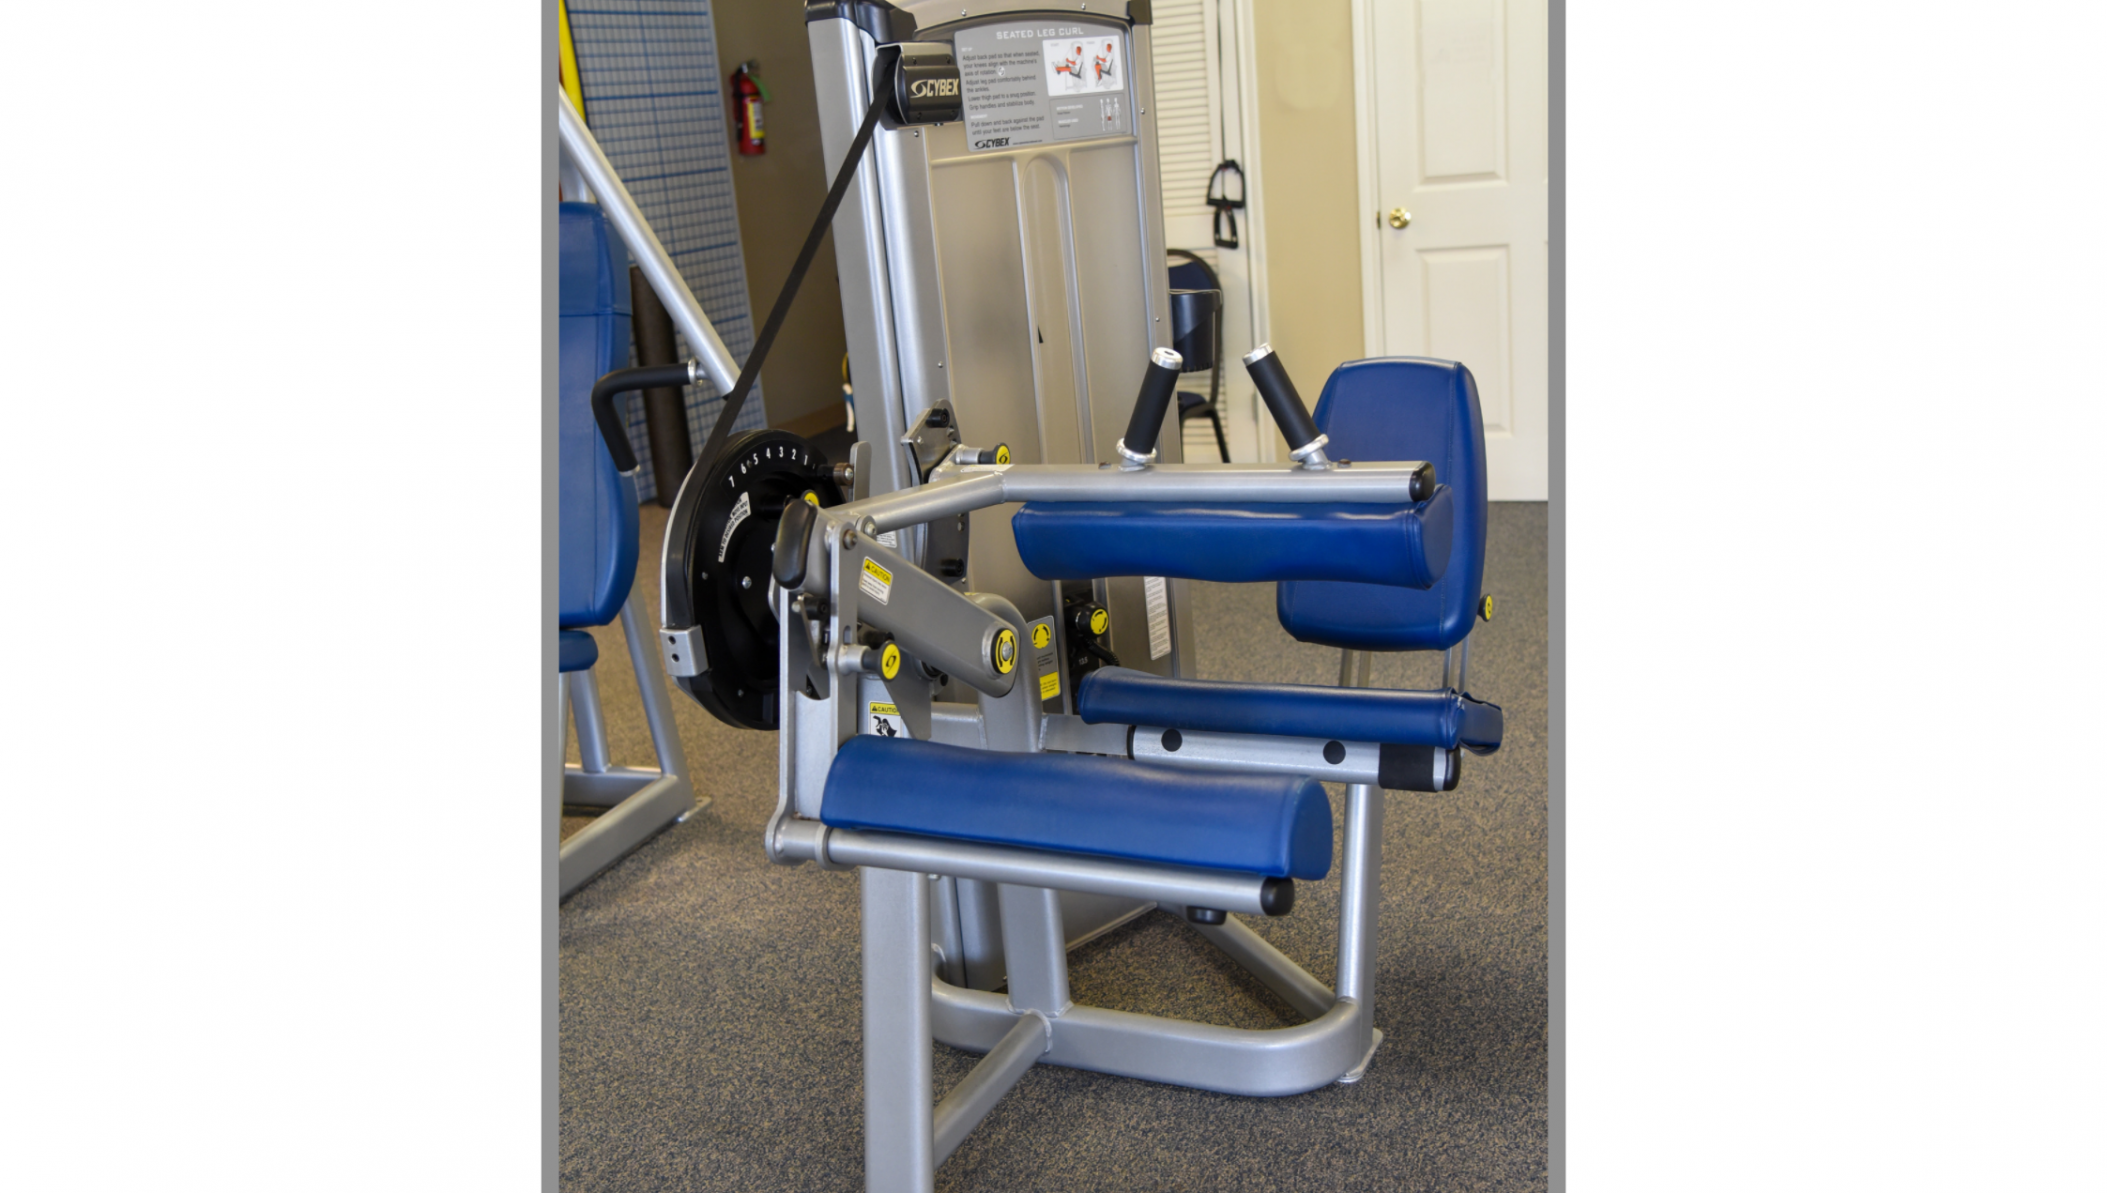 Cybex V Series Seated Leg Curl with Adjustable Starting Position.